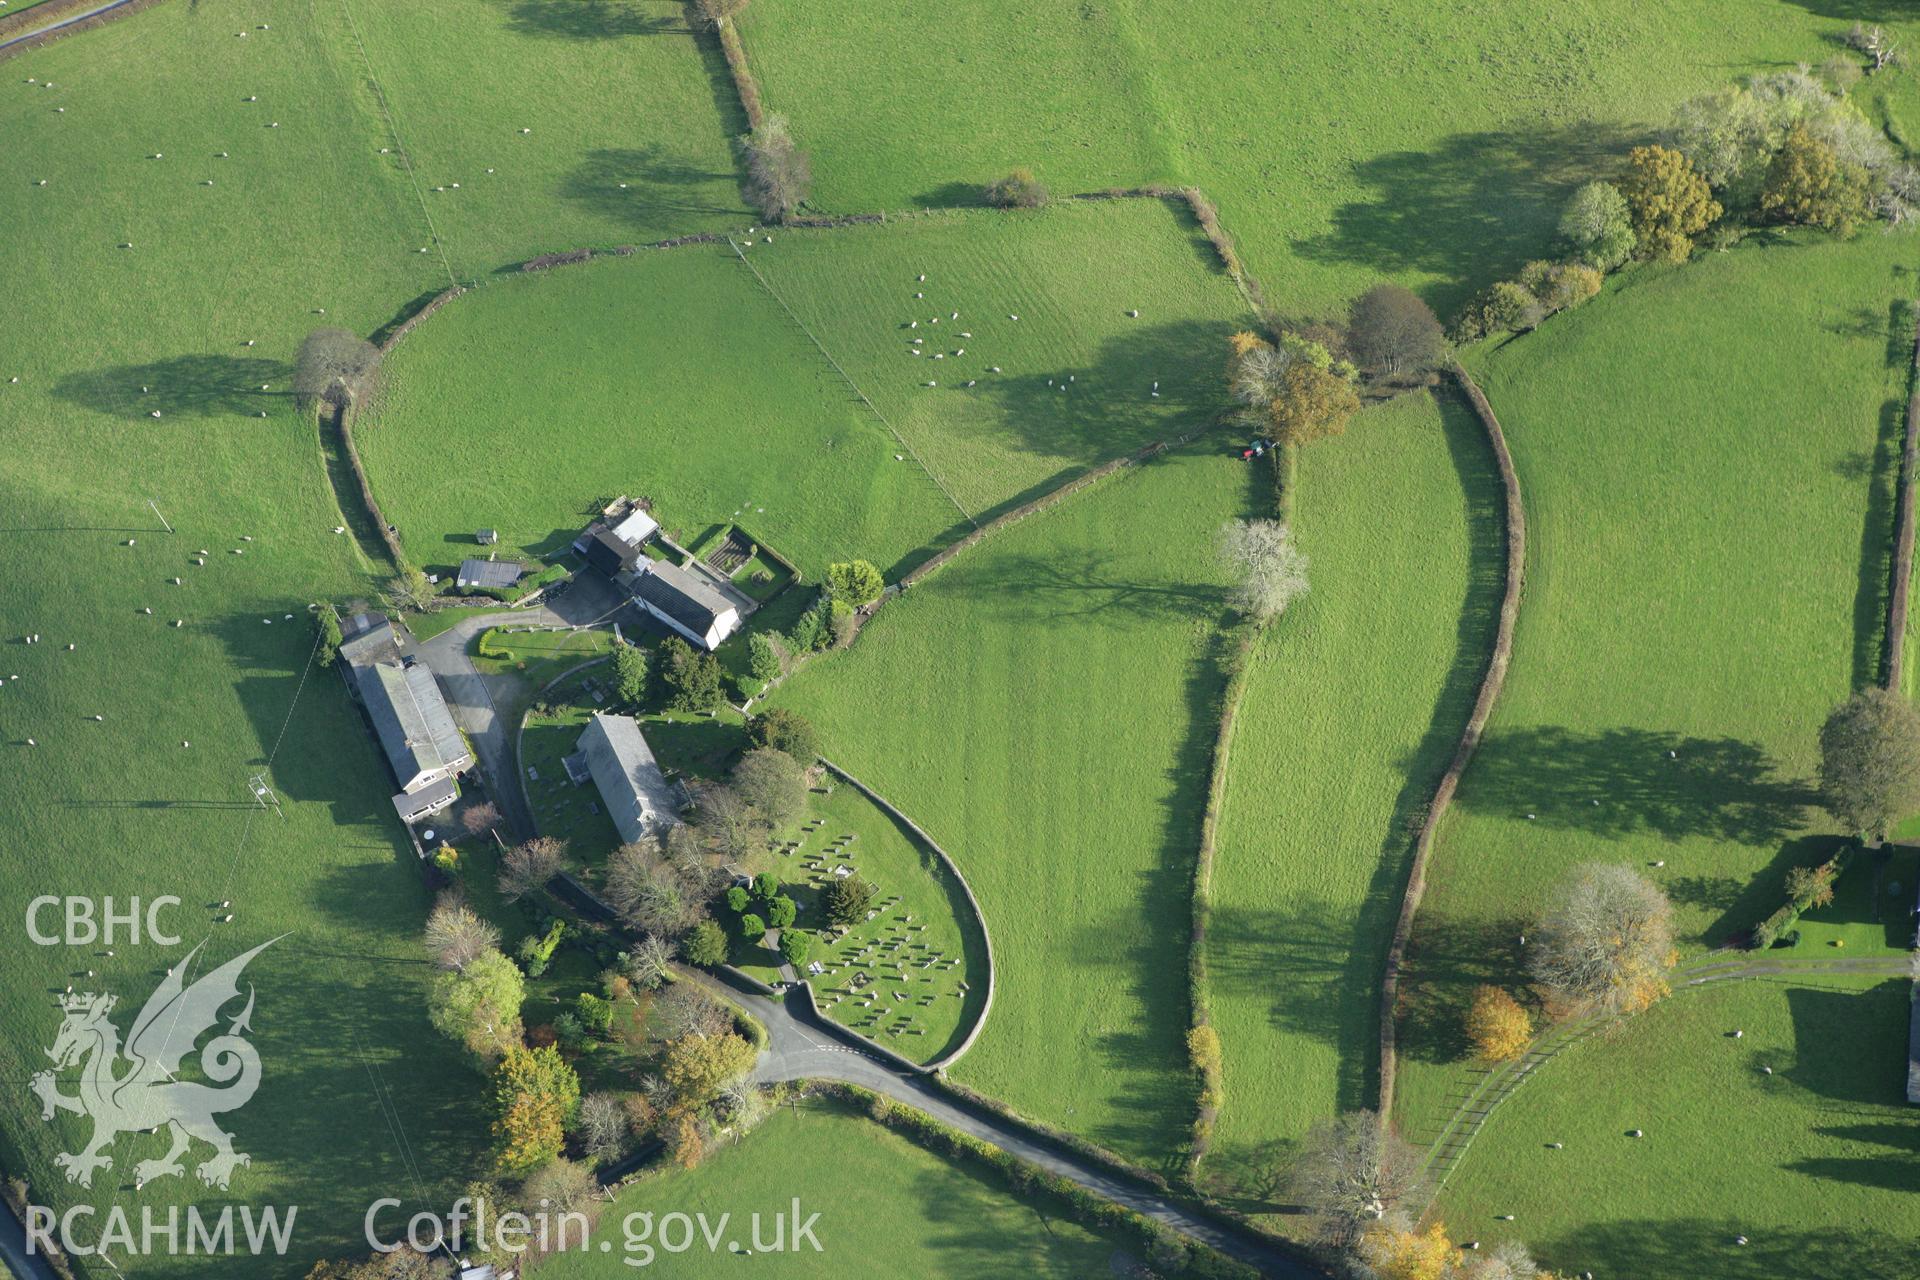 RCAHMW colour oblique photograph of St Cadfan's Church. Taken by Toby Driver on 30/10/2007.